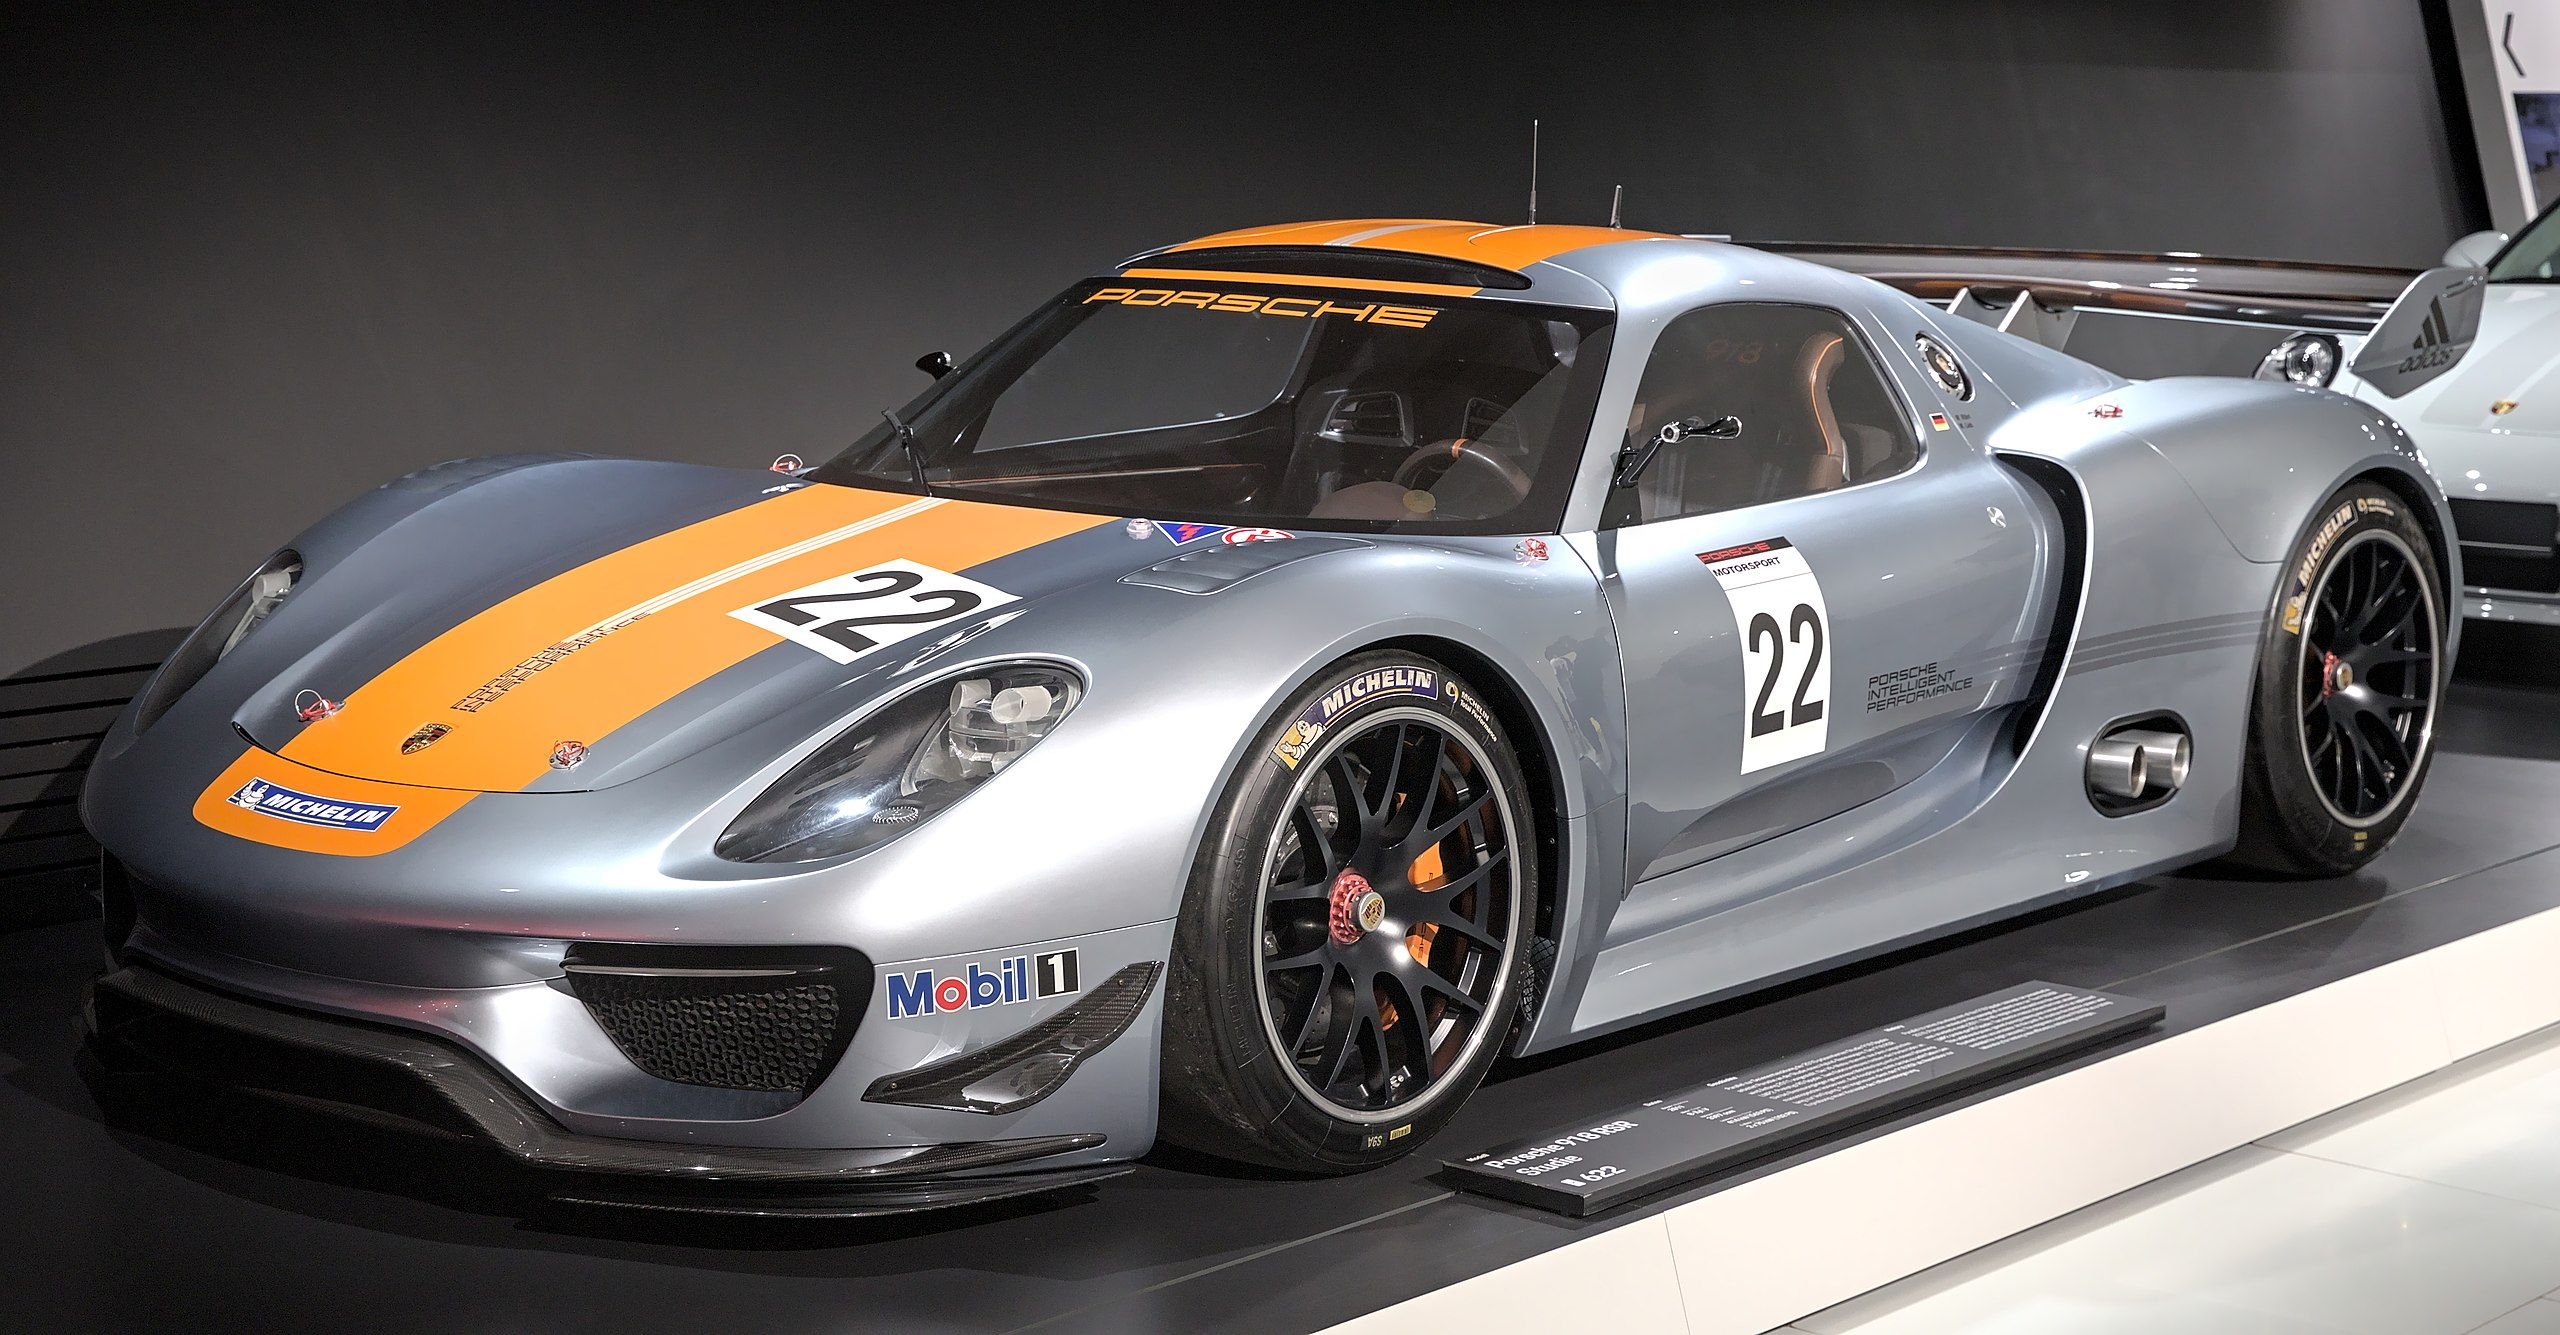 Top 10 Facts Every Enthusiast Must Know About The Porsche 918 Spyder